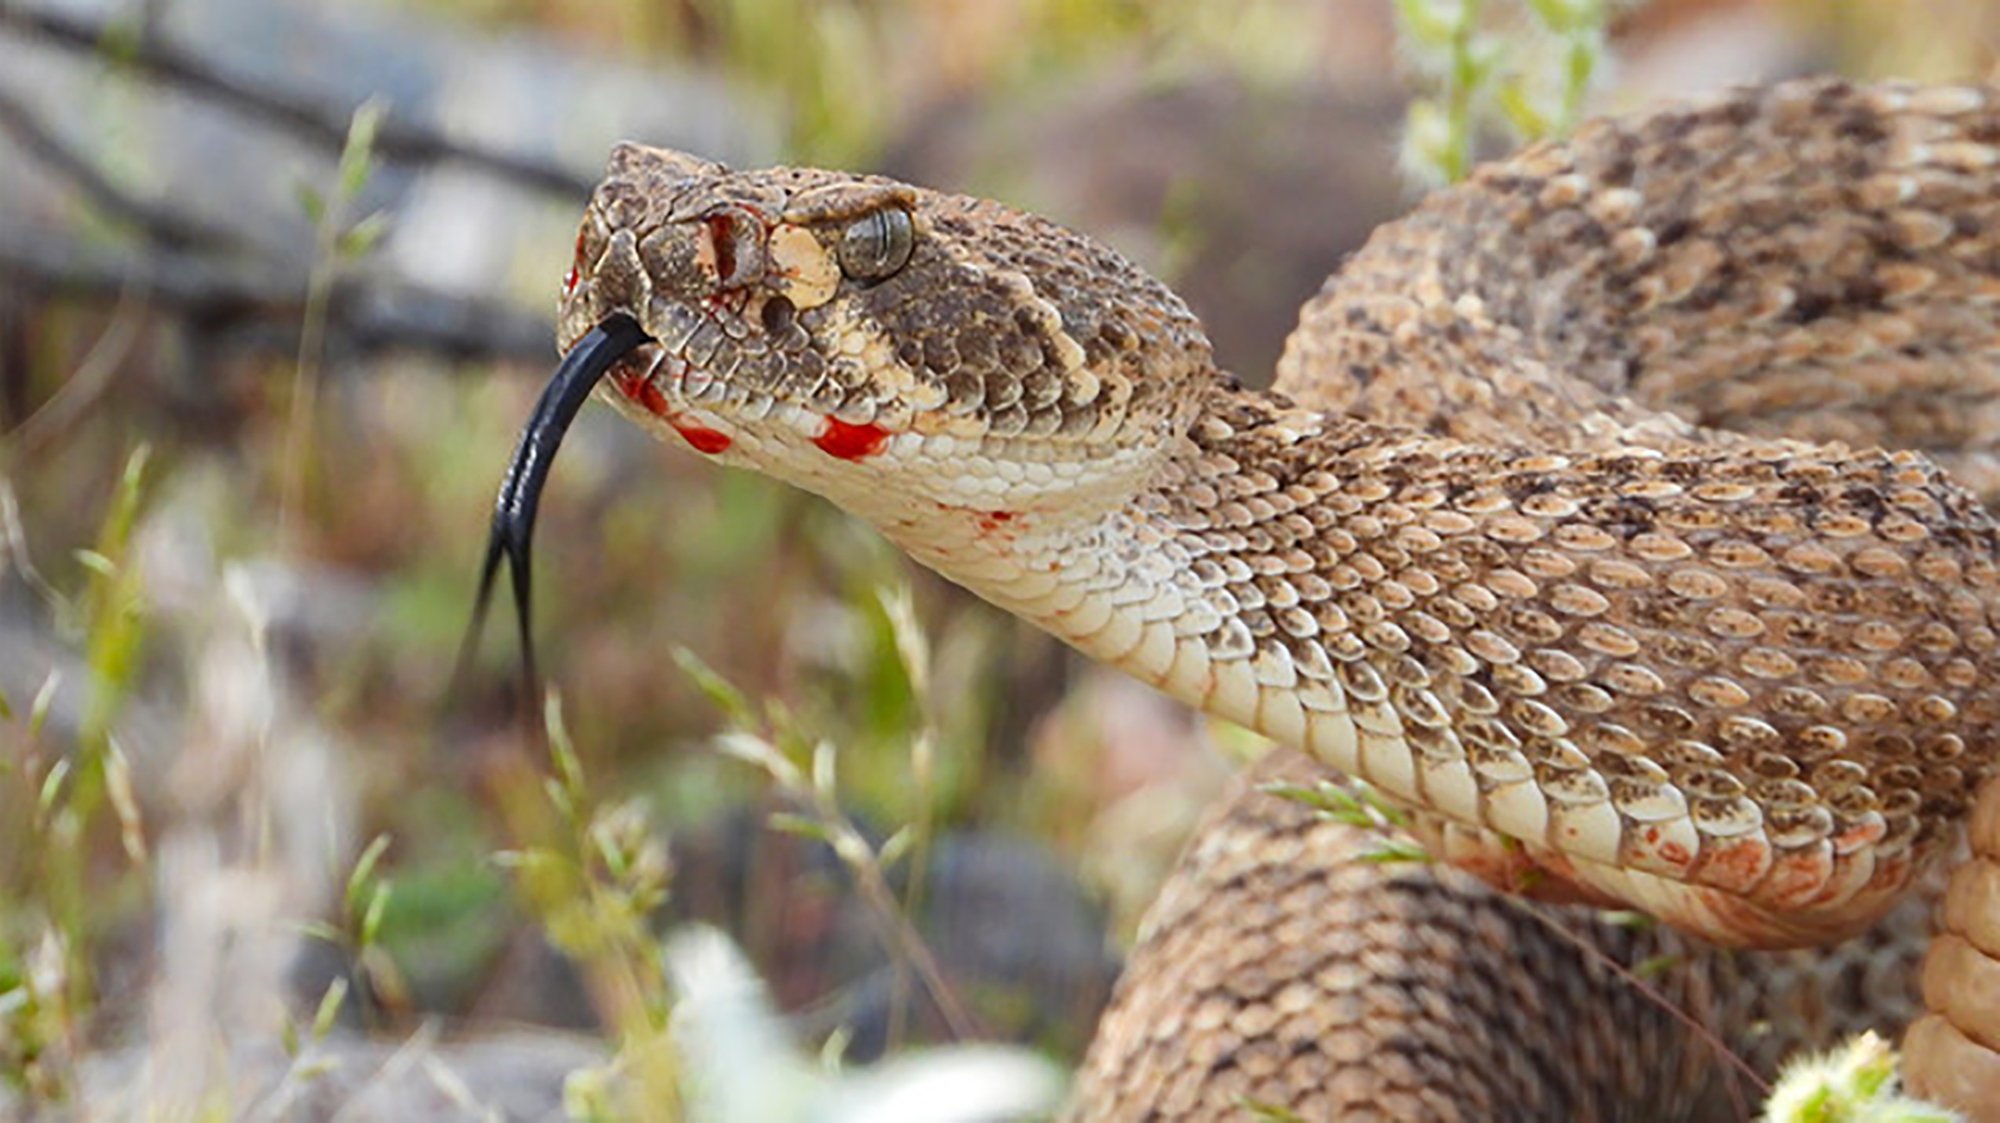 what should you do if bitten by rattlesnake